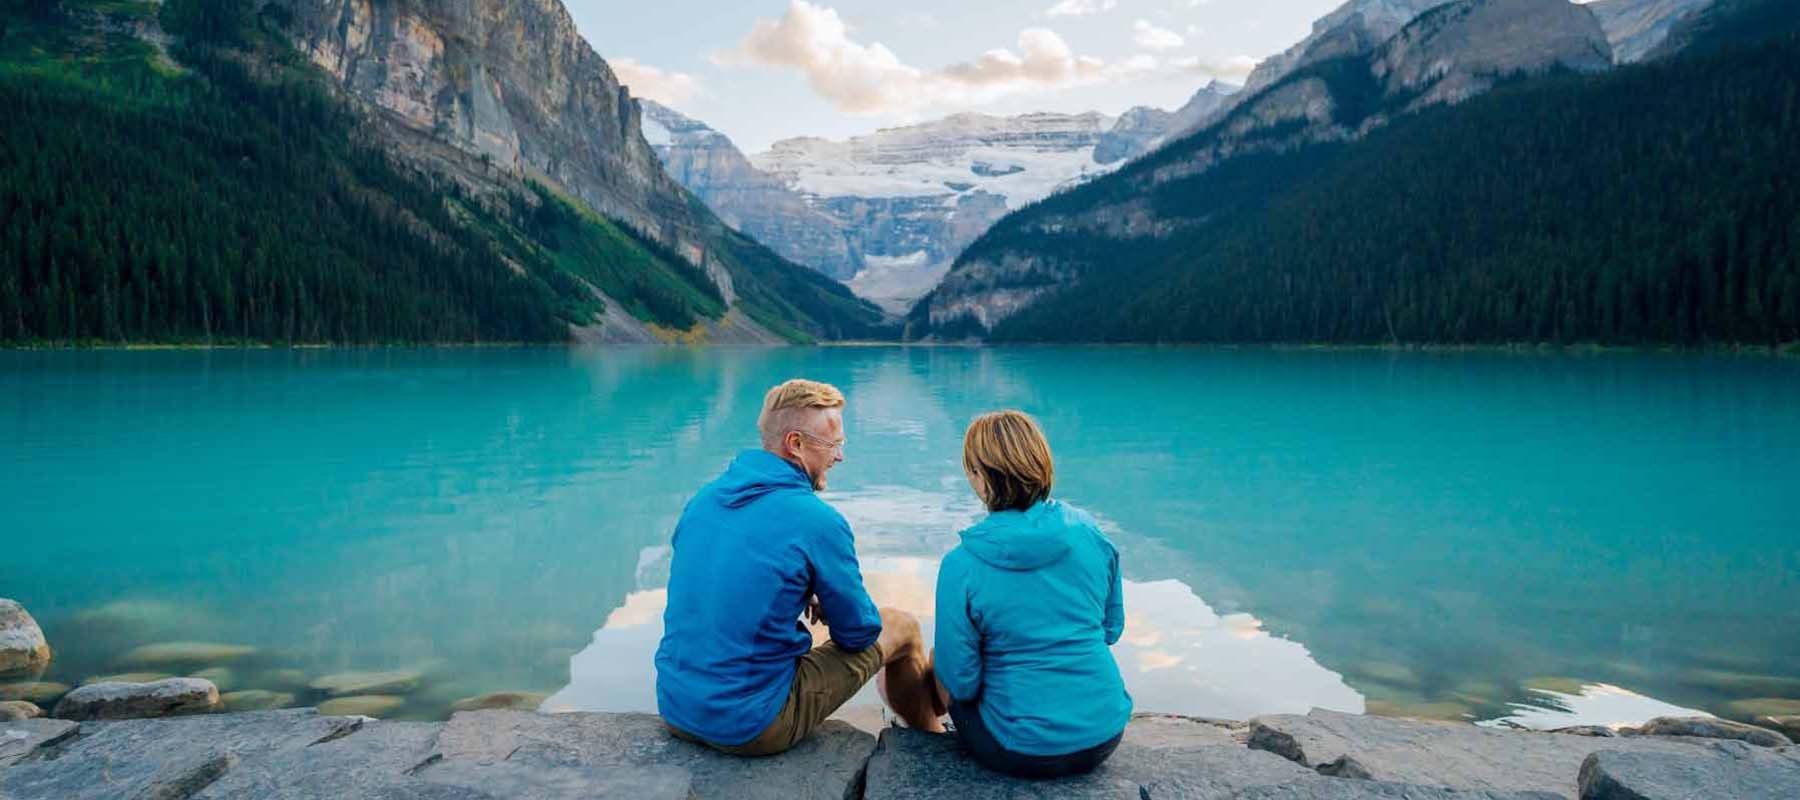 Canada Train Trips, Road Trips & Luxury Vacations | Summer in Banff & Lake Louise